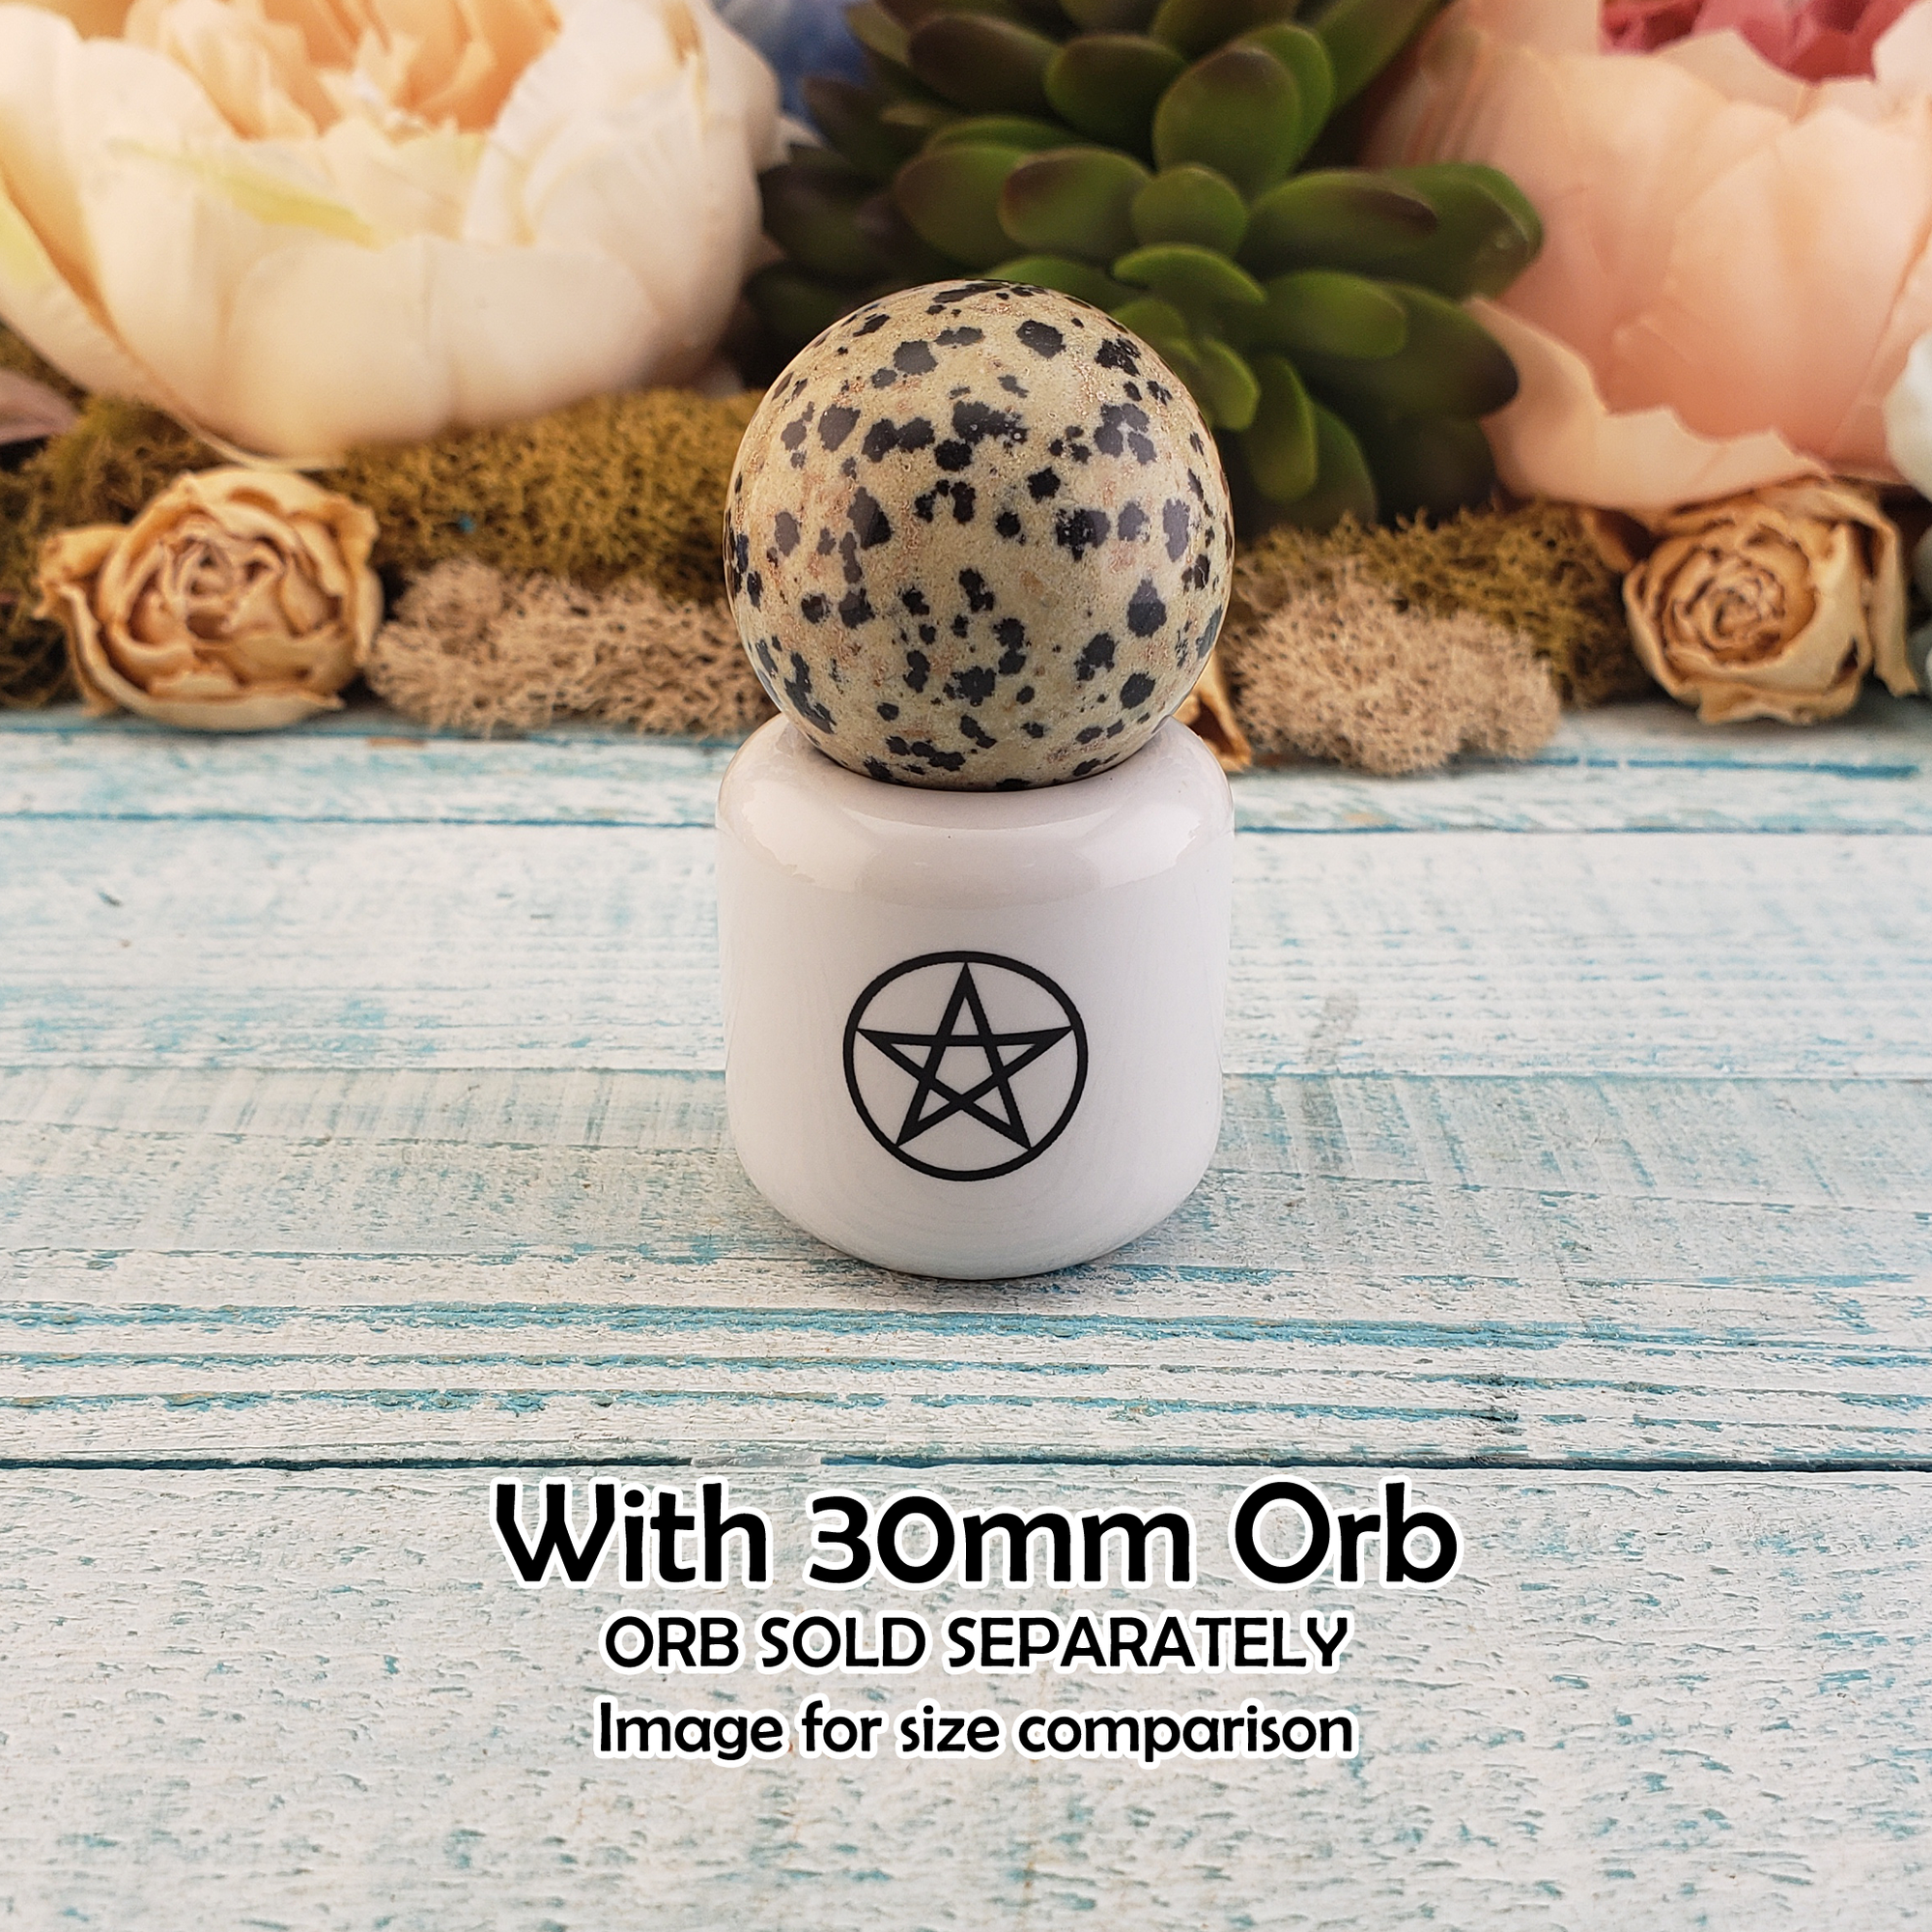 White Pentacle Ceramic Sphere Stand - Chime Candle Holder - Incense Holder - with 30mm Crystal Sphere for Size Comparison